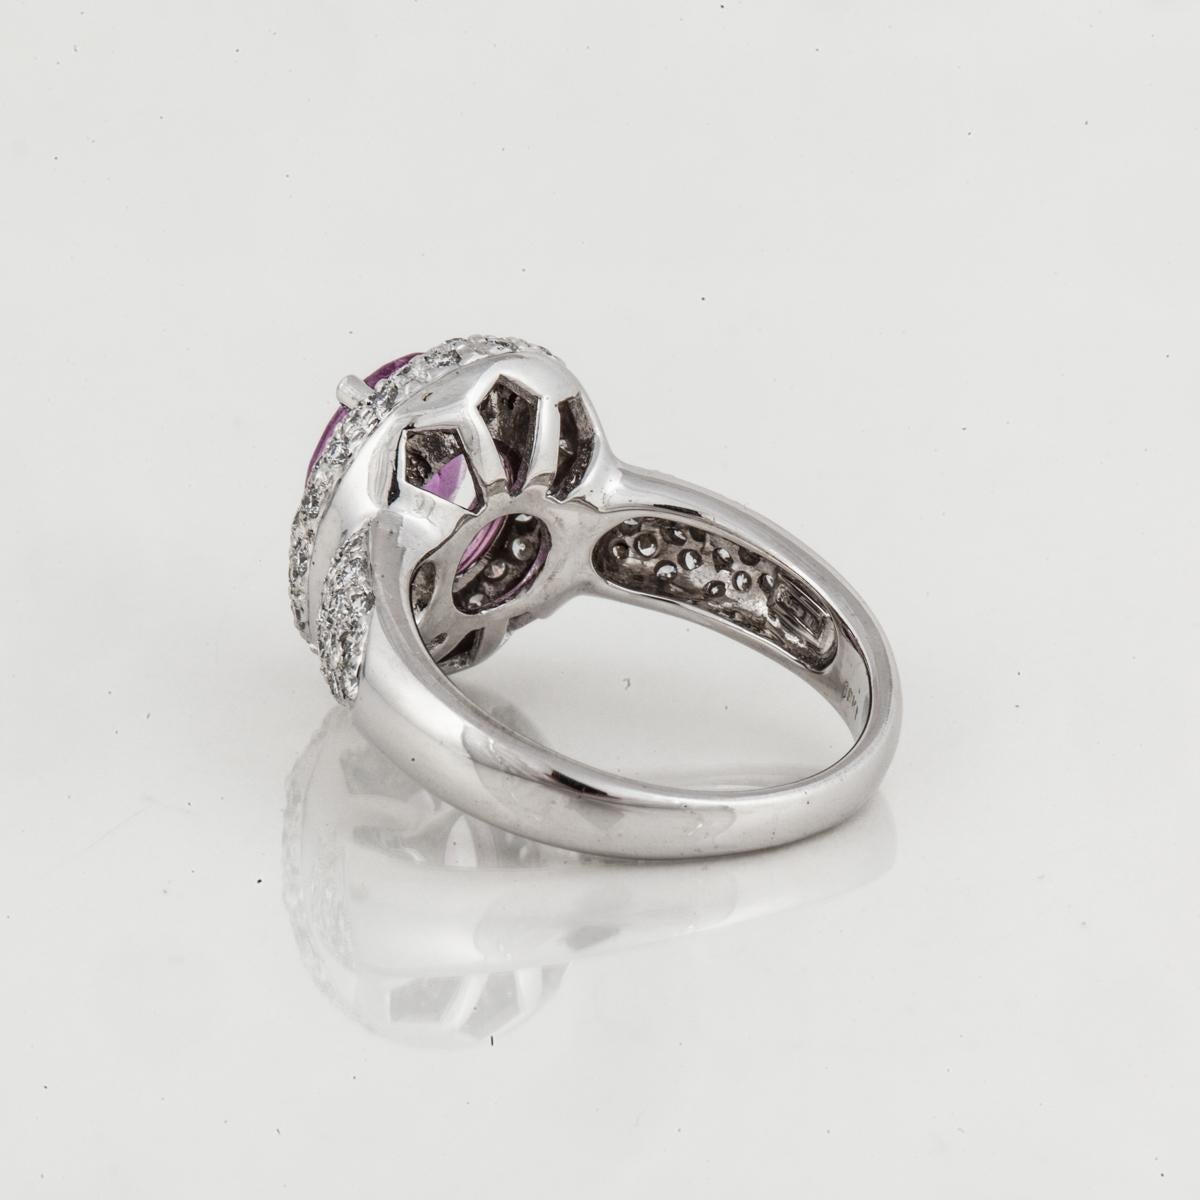 3.03 Ct. Oval Pink Sapphire and Diamond Ring in 18K White Gold In Good Condition For Sale In Houston, TX